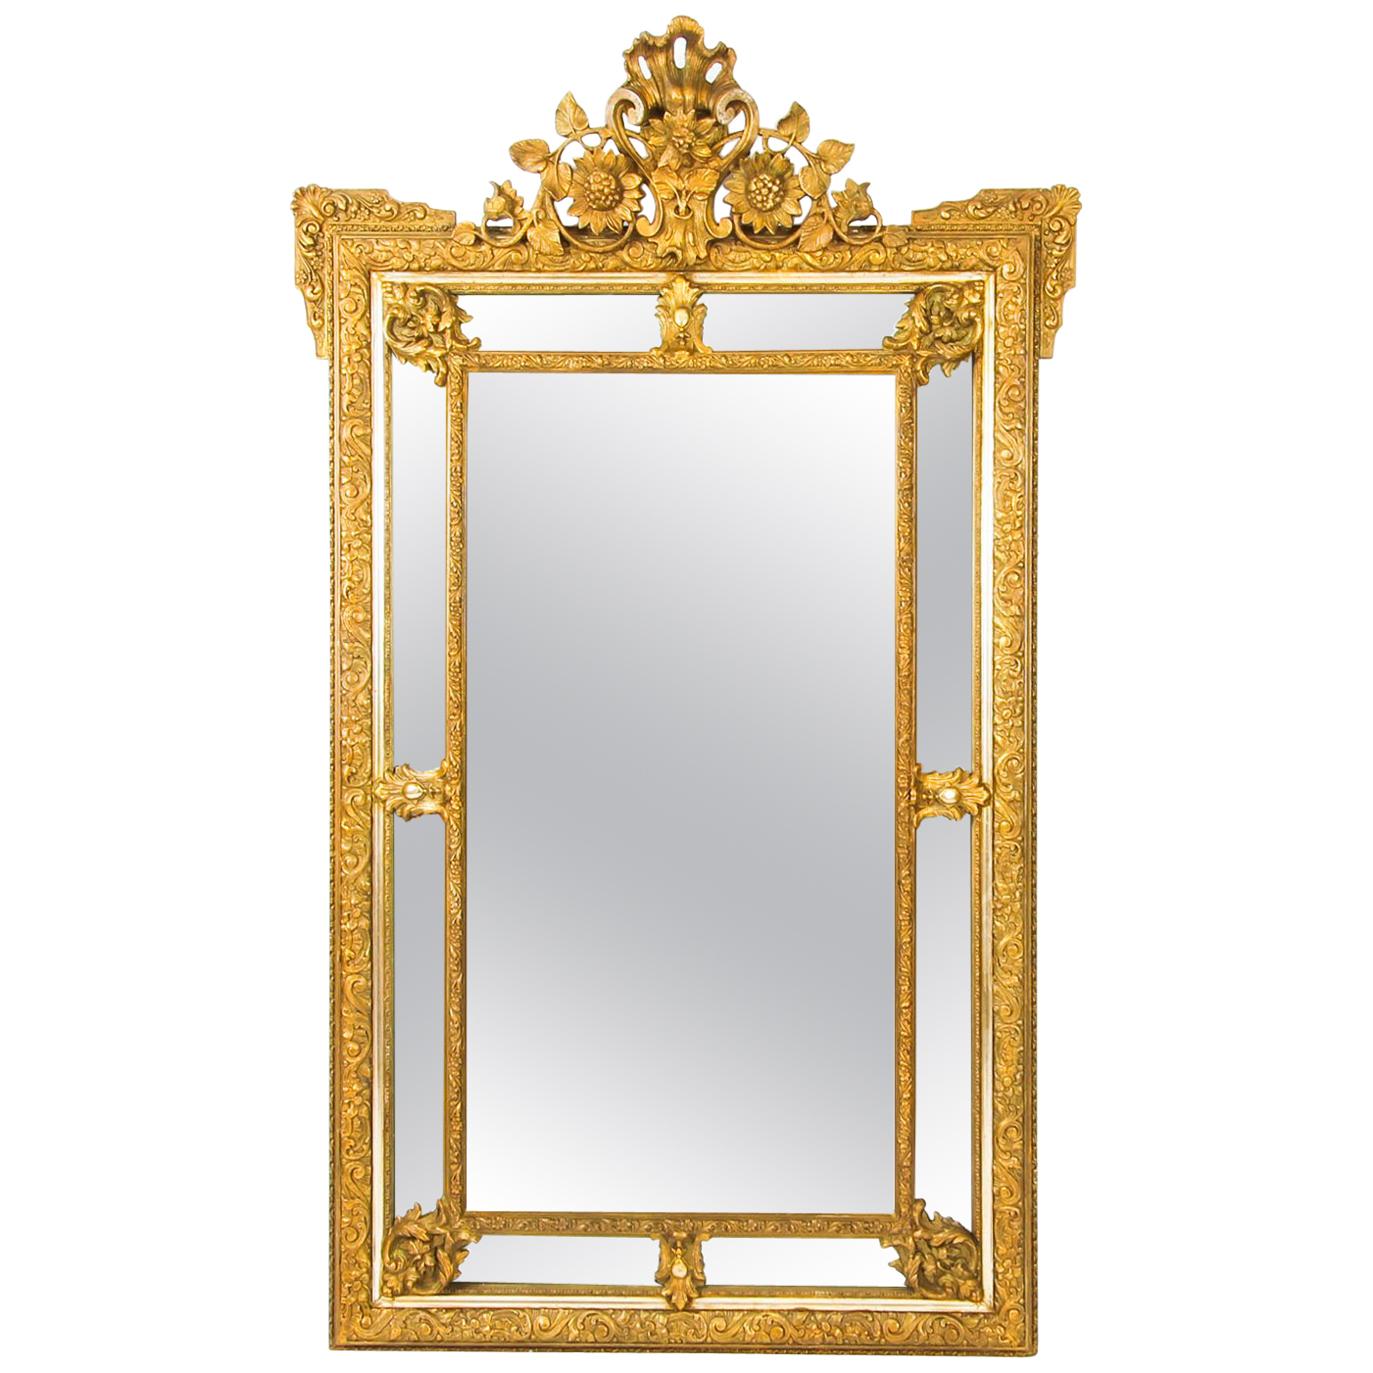 Antique French Giltwood Overmantel Louis Revival Mirror, 19th Century